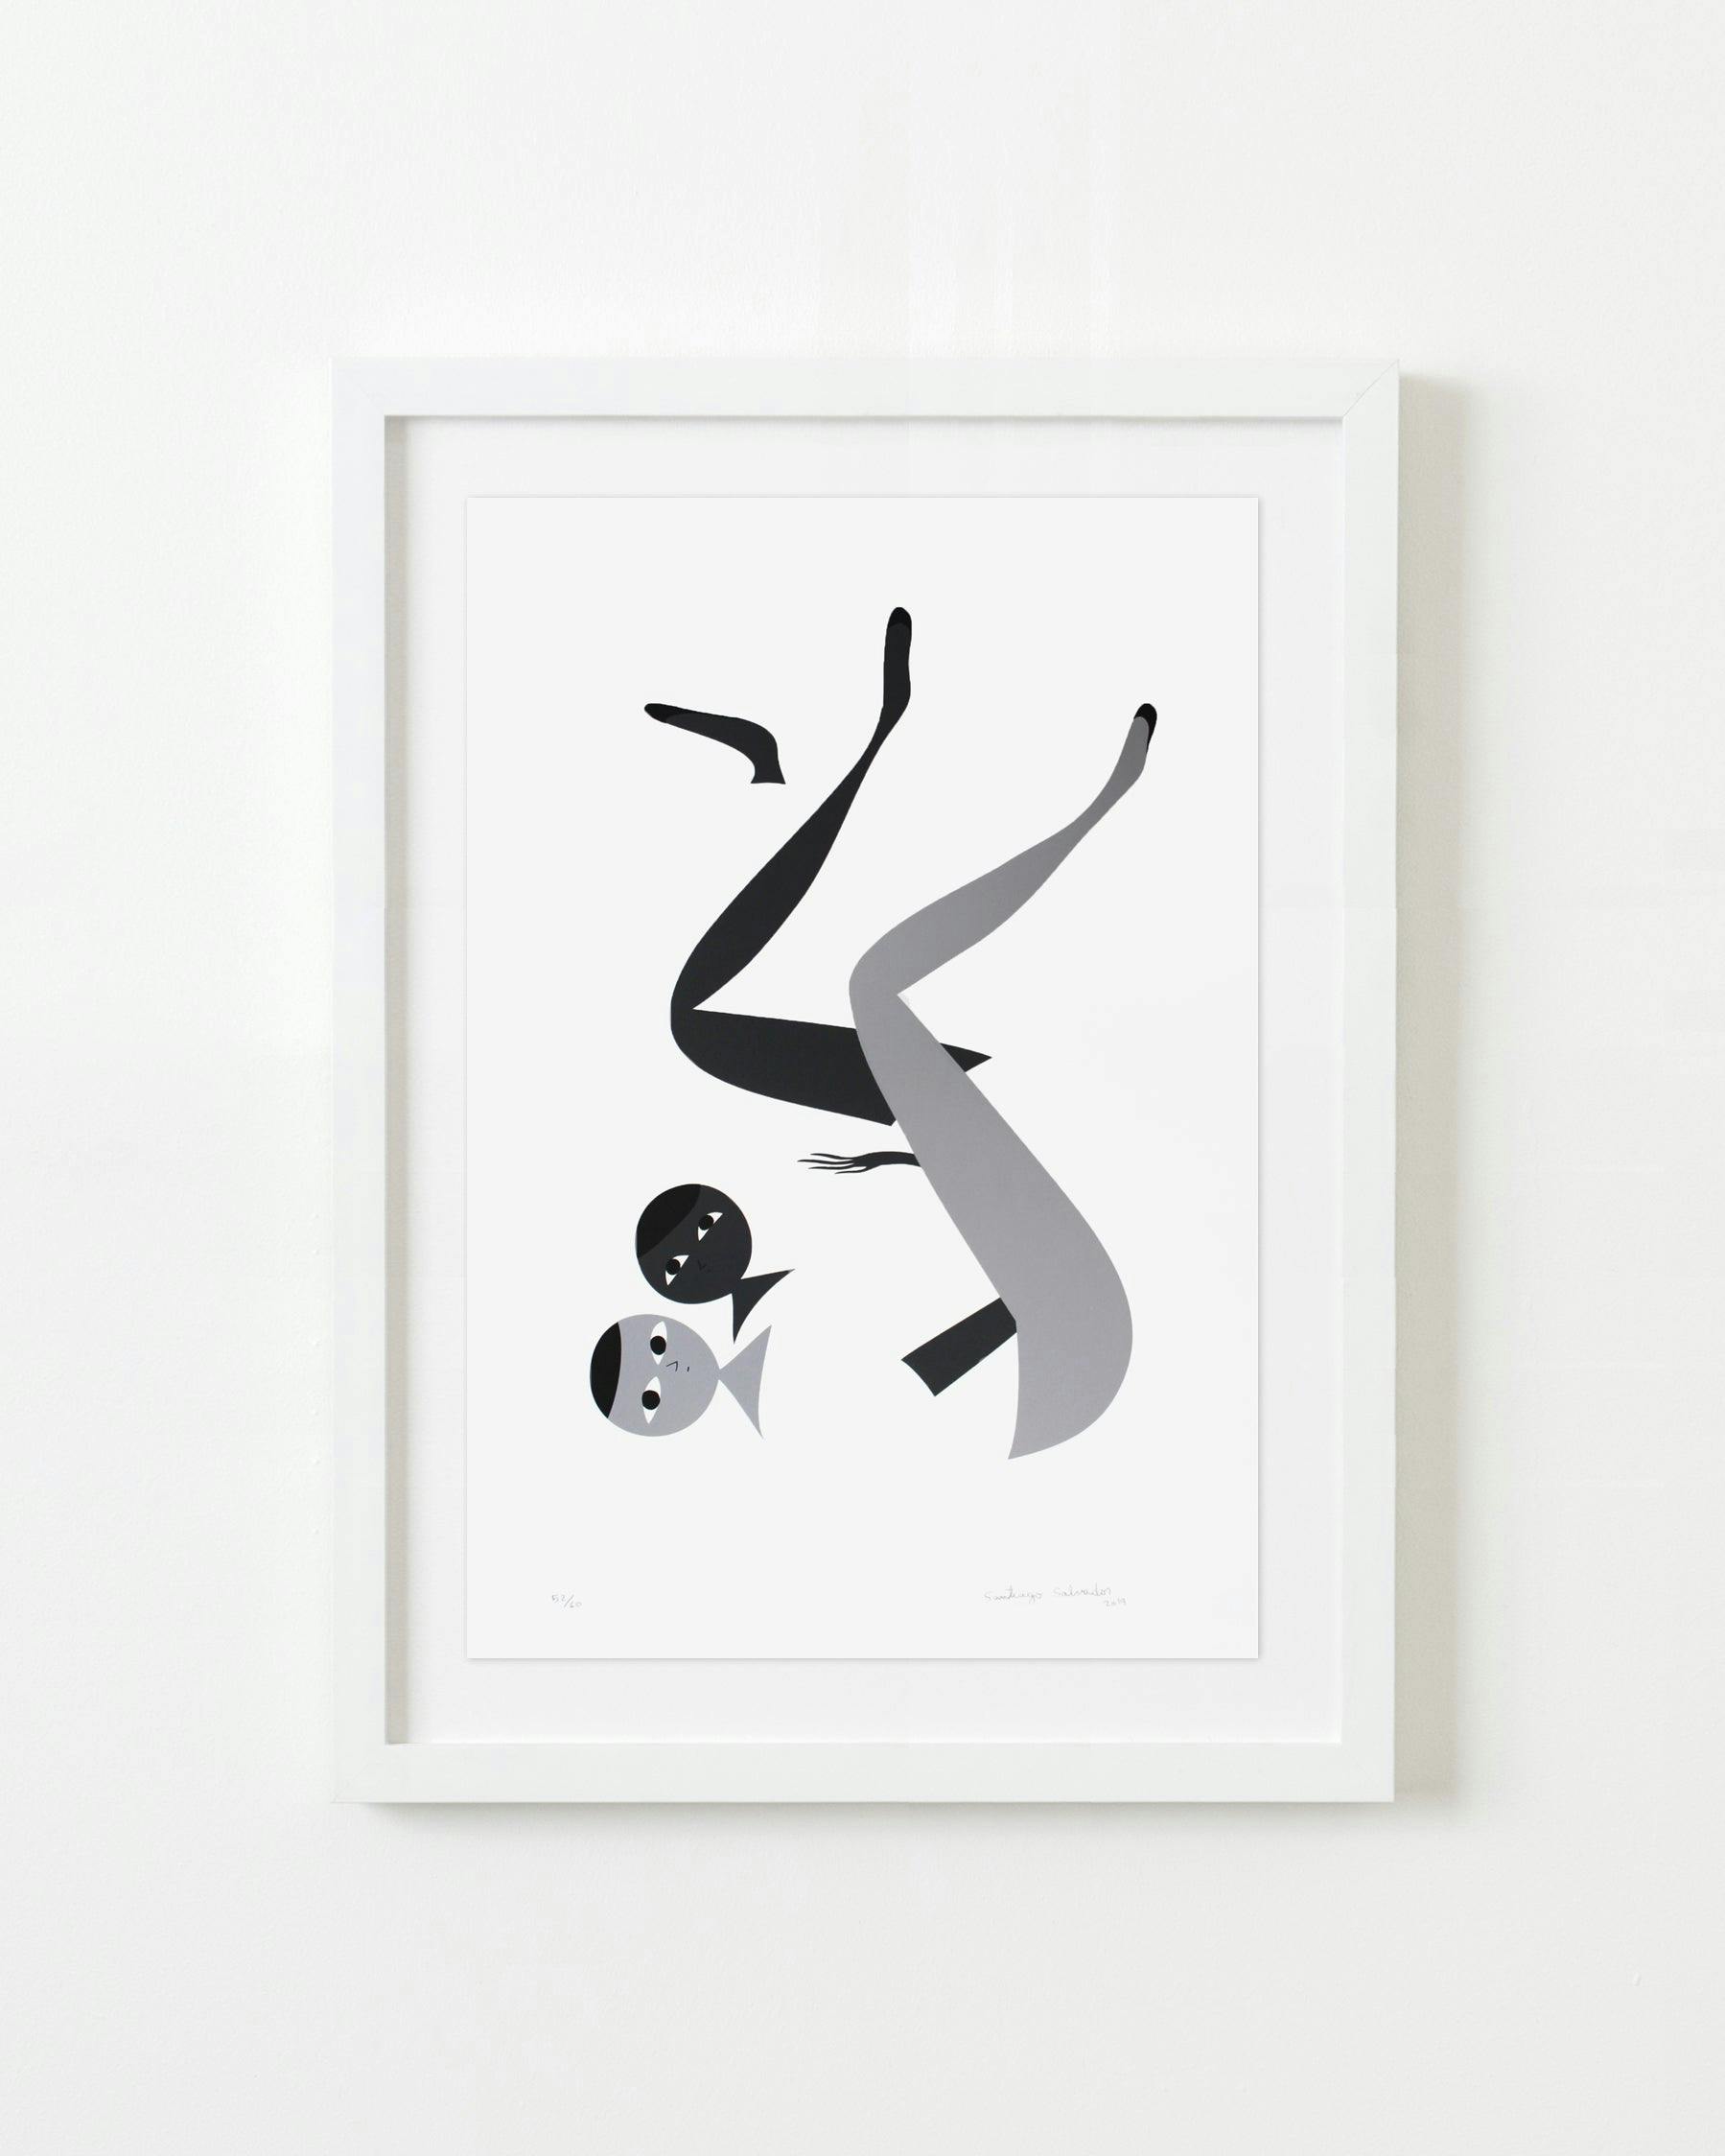 Print by Santiago Ascui titled "Standy Grey 2".